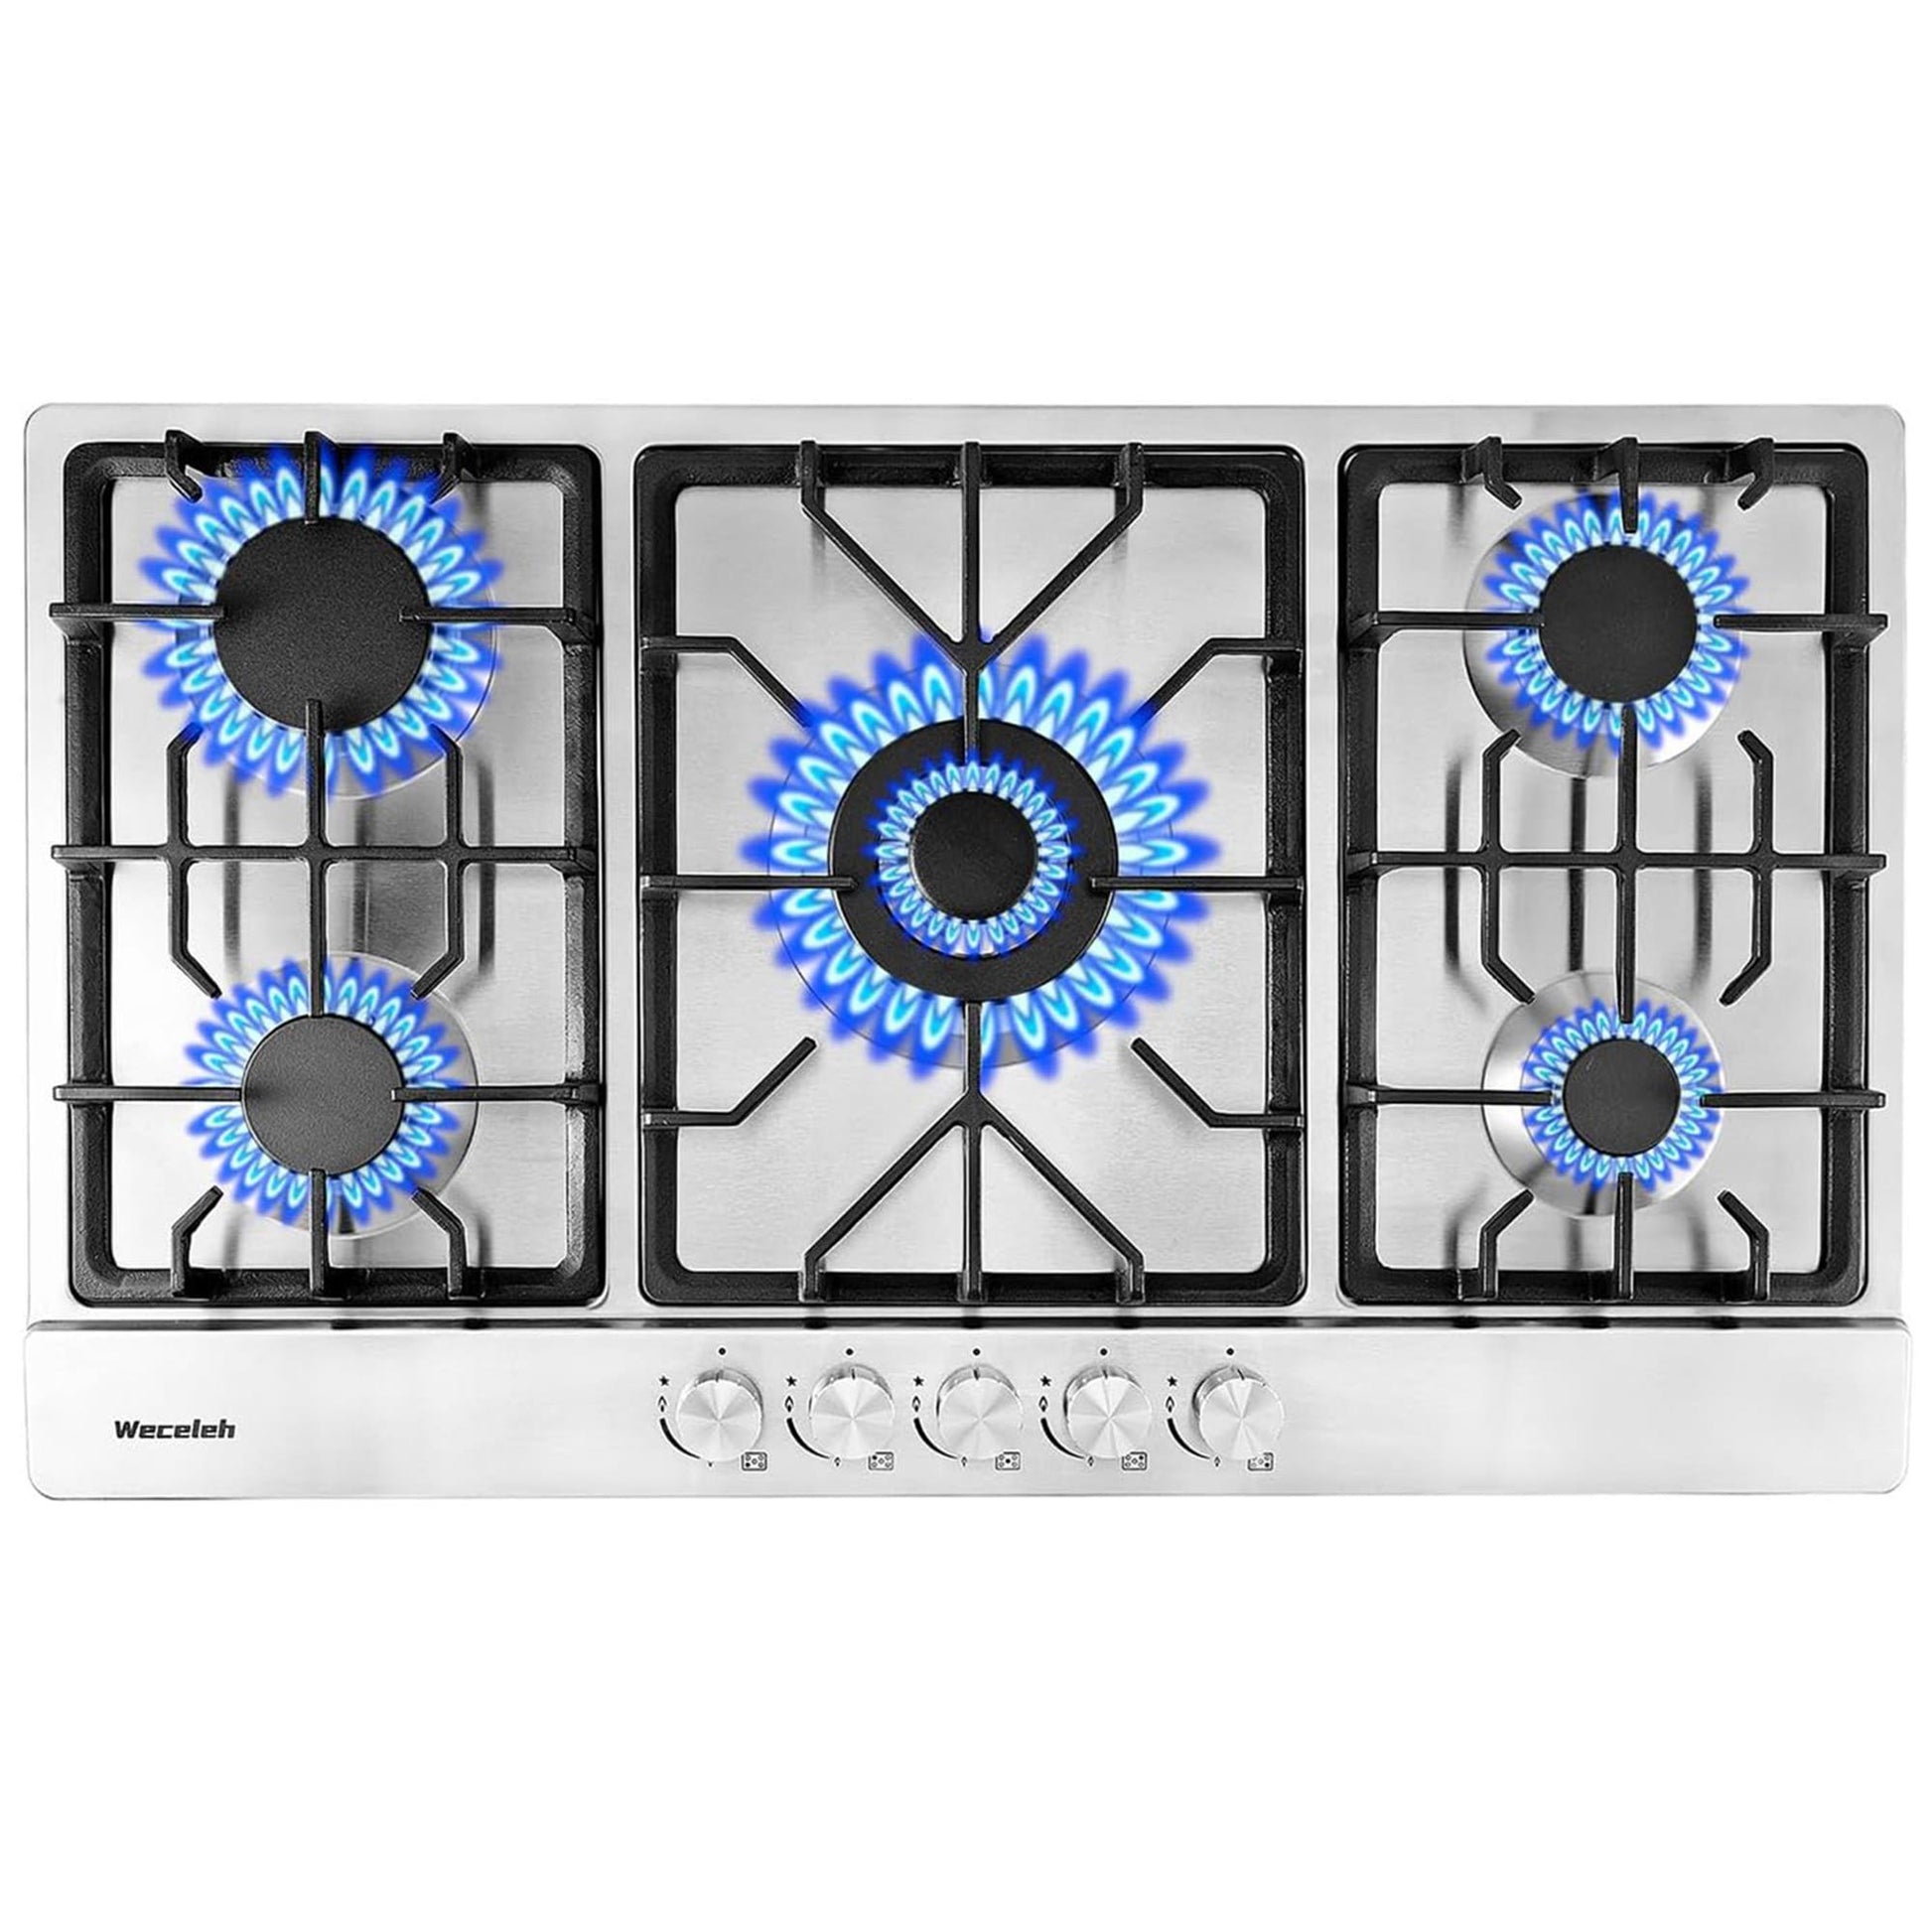 34" Built in Gas Cooktop Stove Top 5 Burners LPG NG silver-kitchen-modern-stainless steel